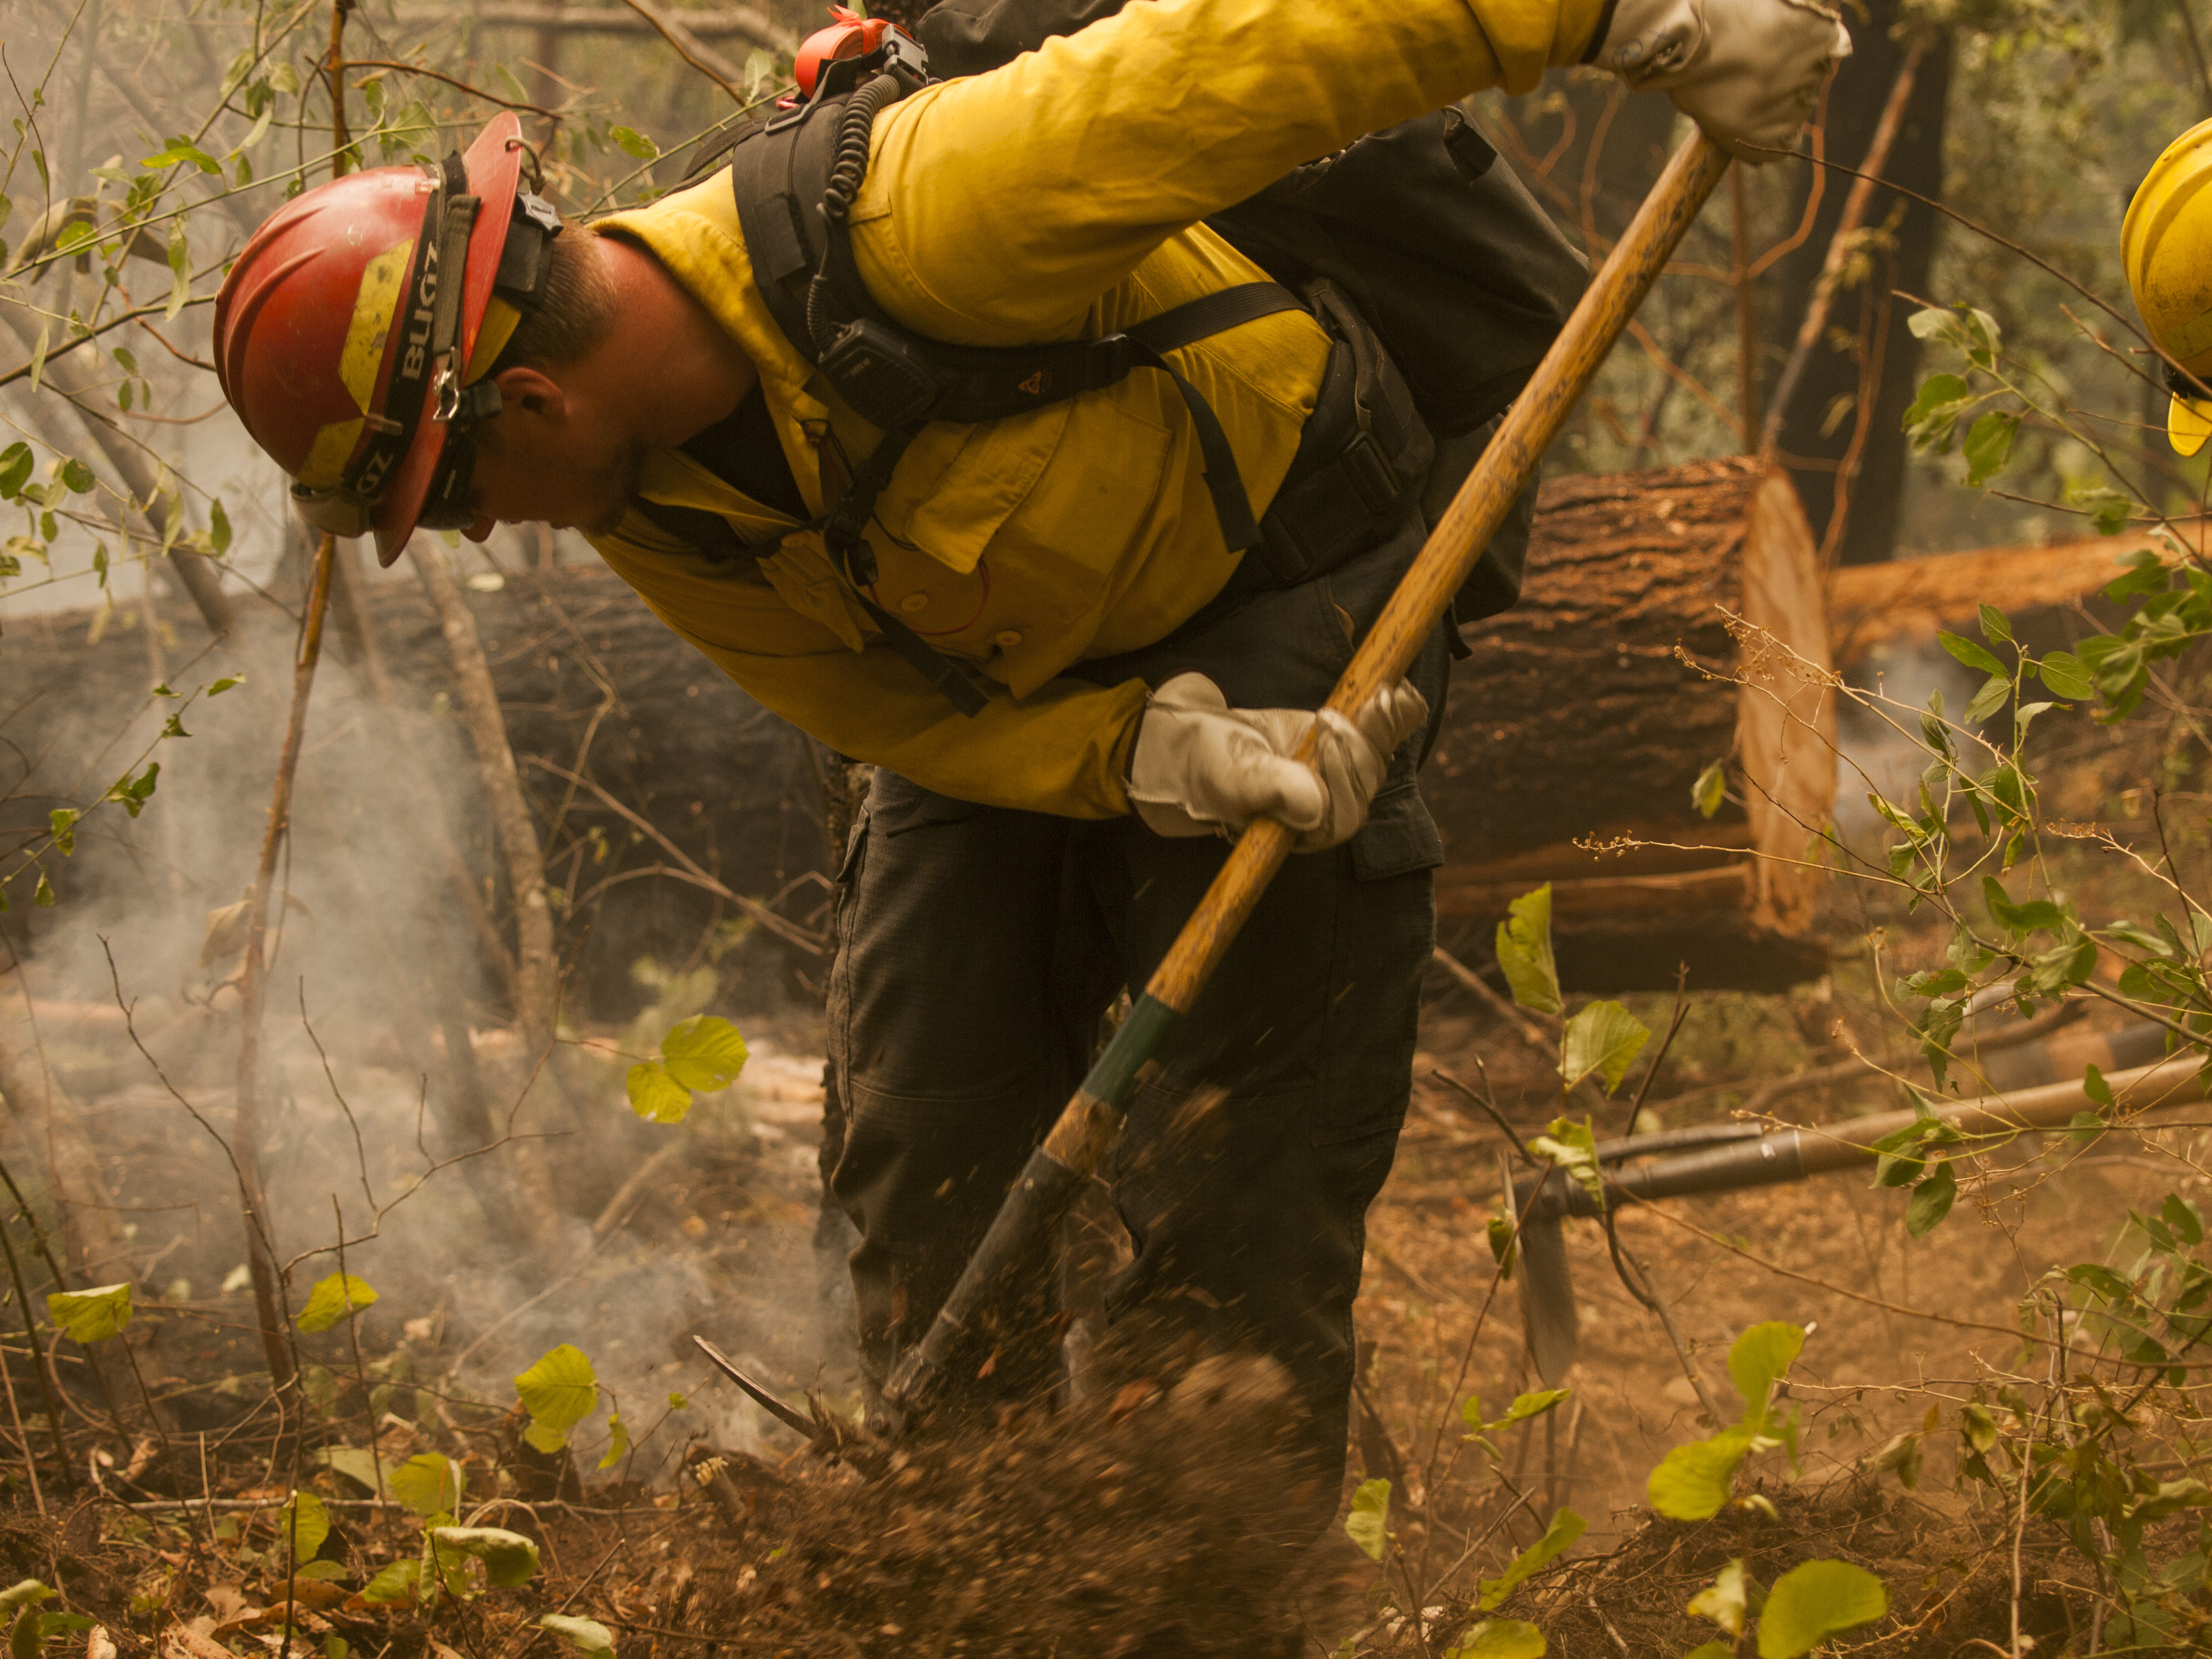 Firefighting wearing personal protective equipment while digging a fire break.